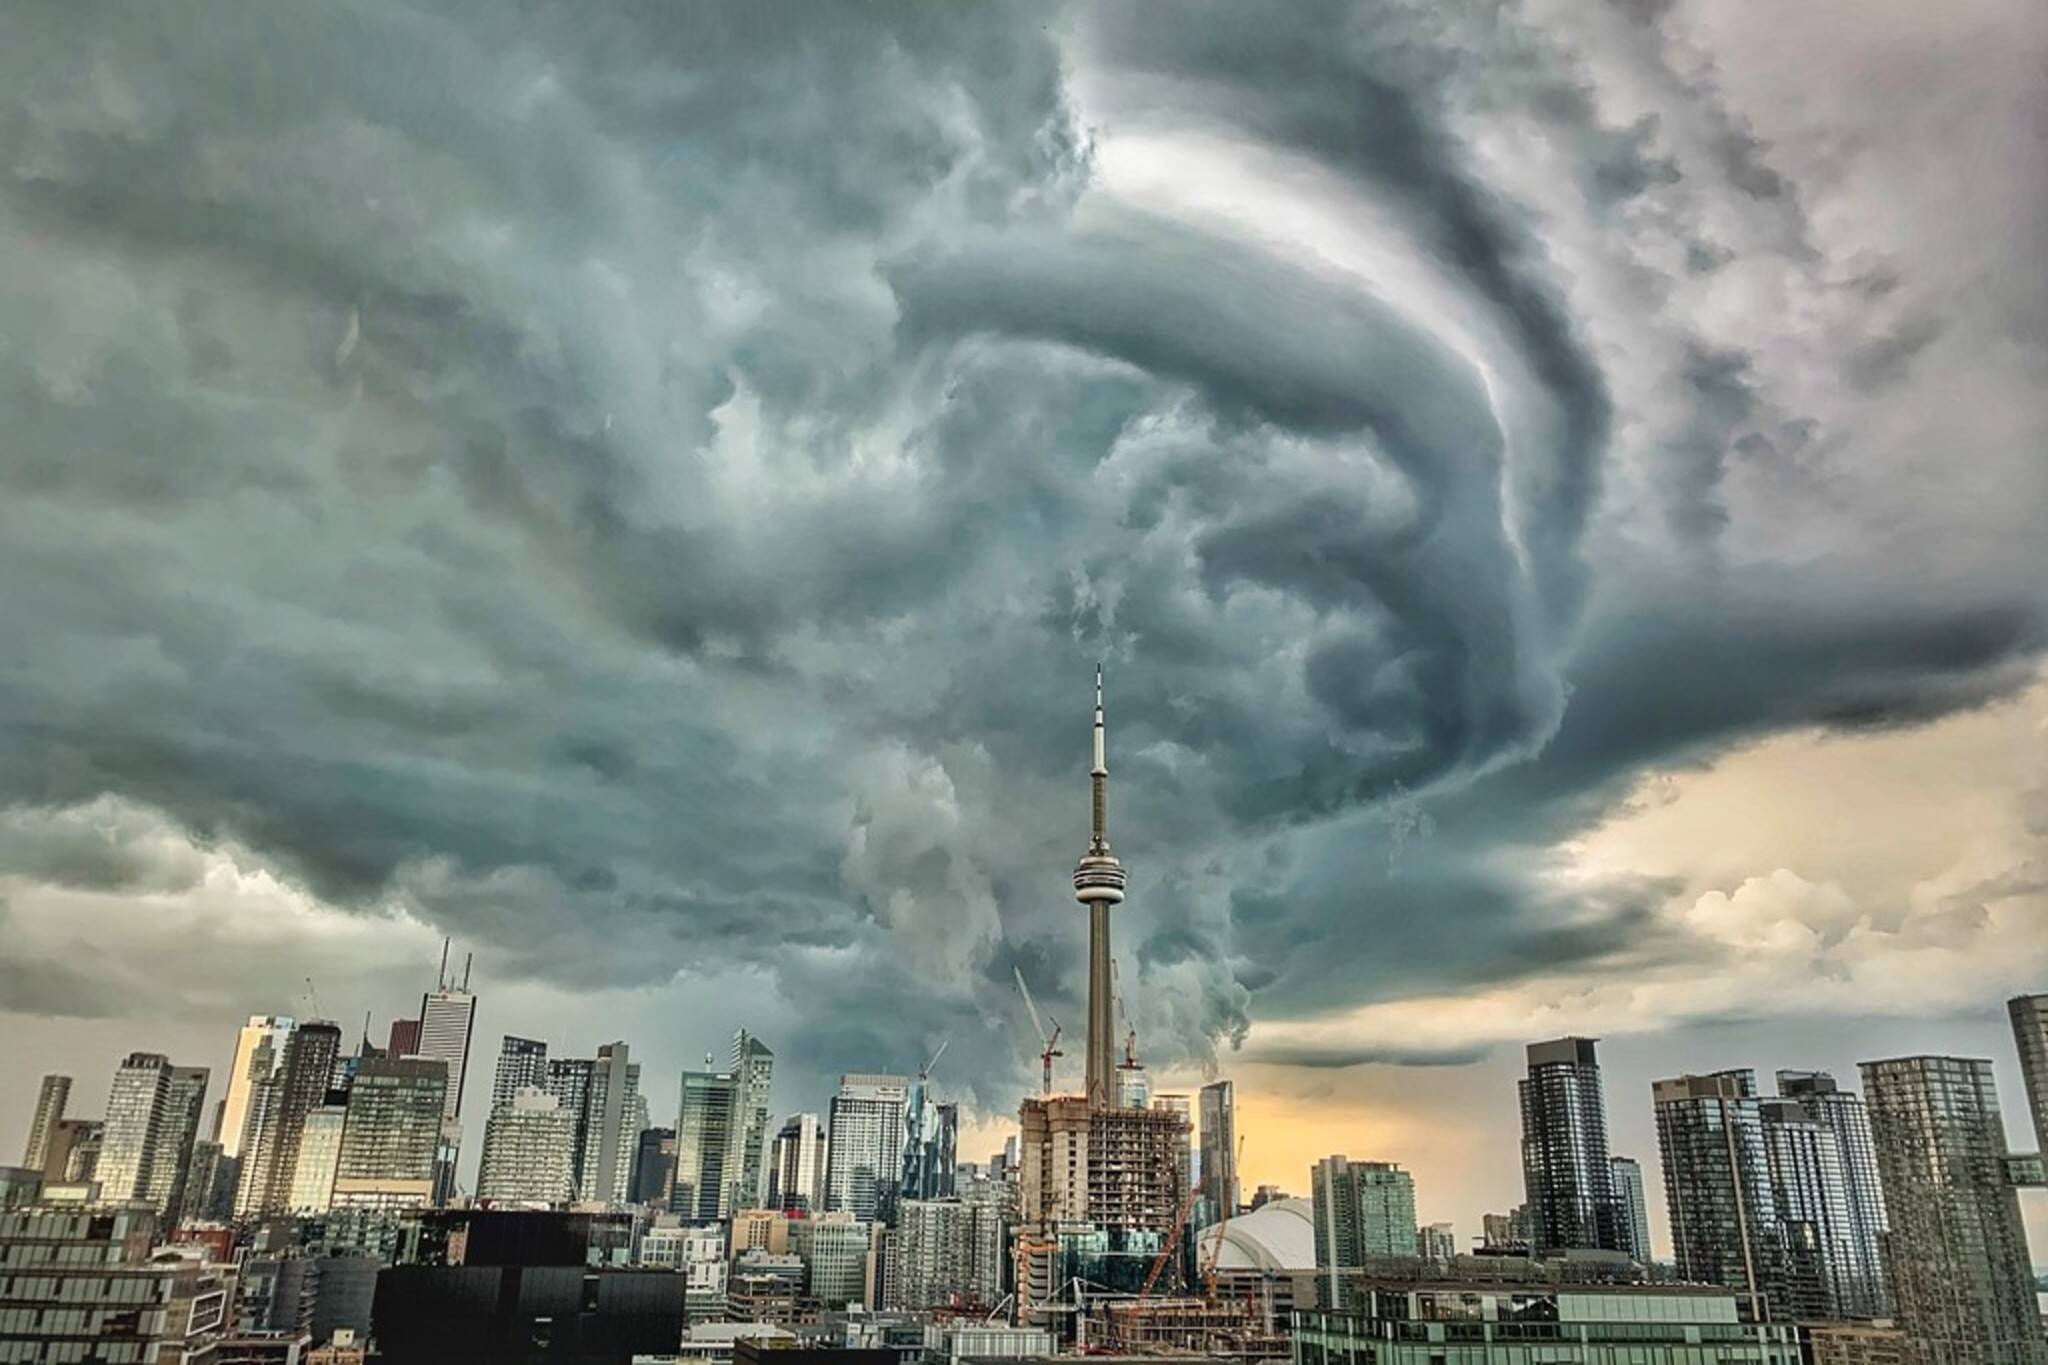 Photos from the storm in Toronto look like they came straight out of